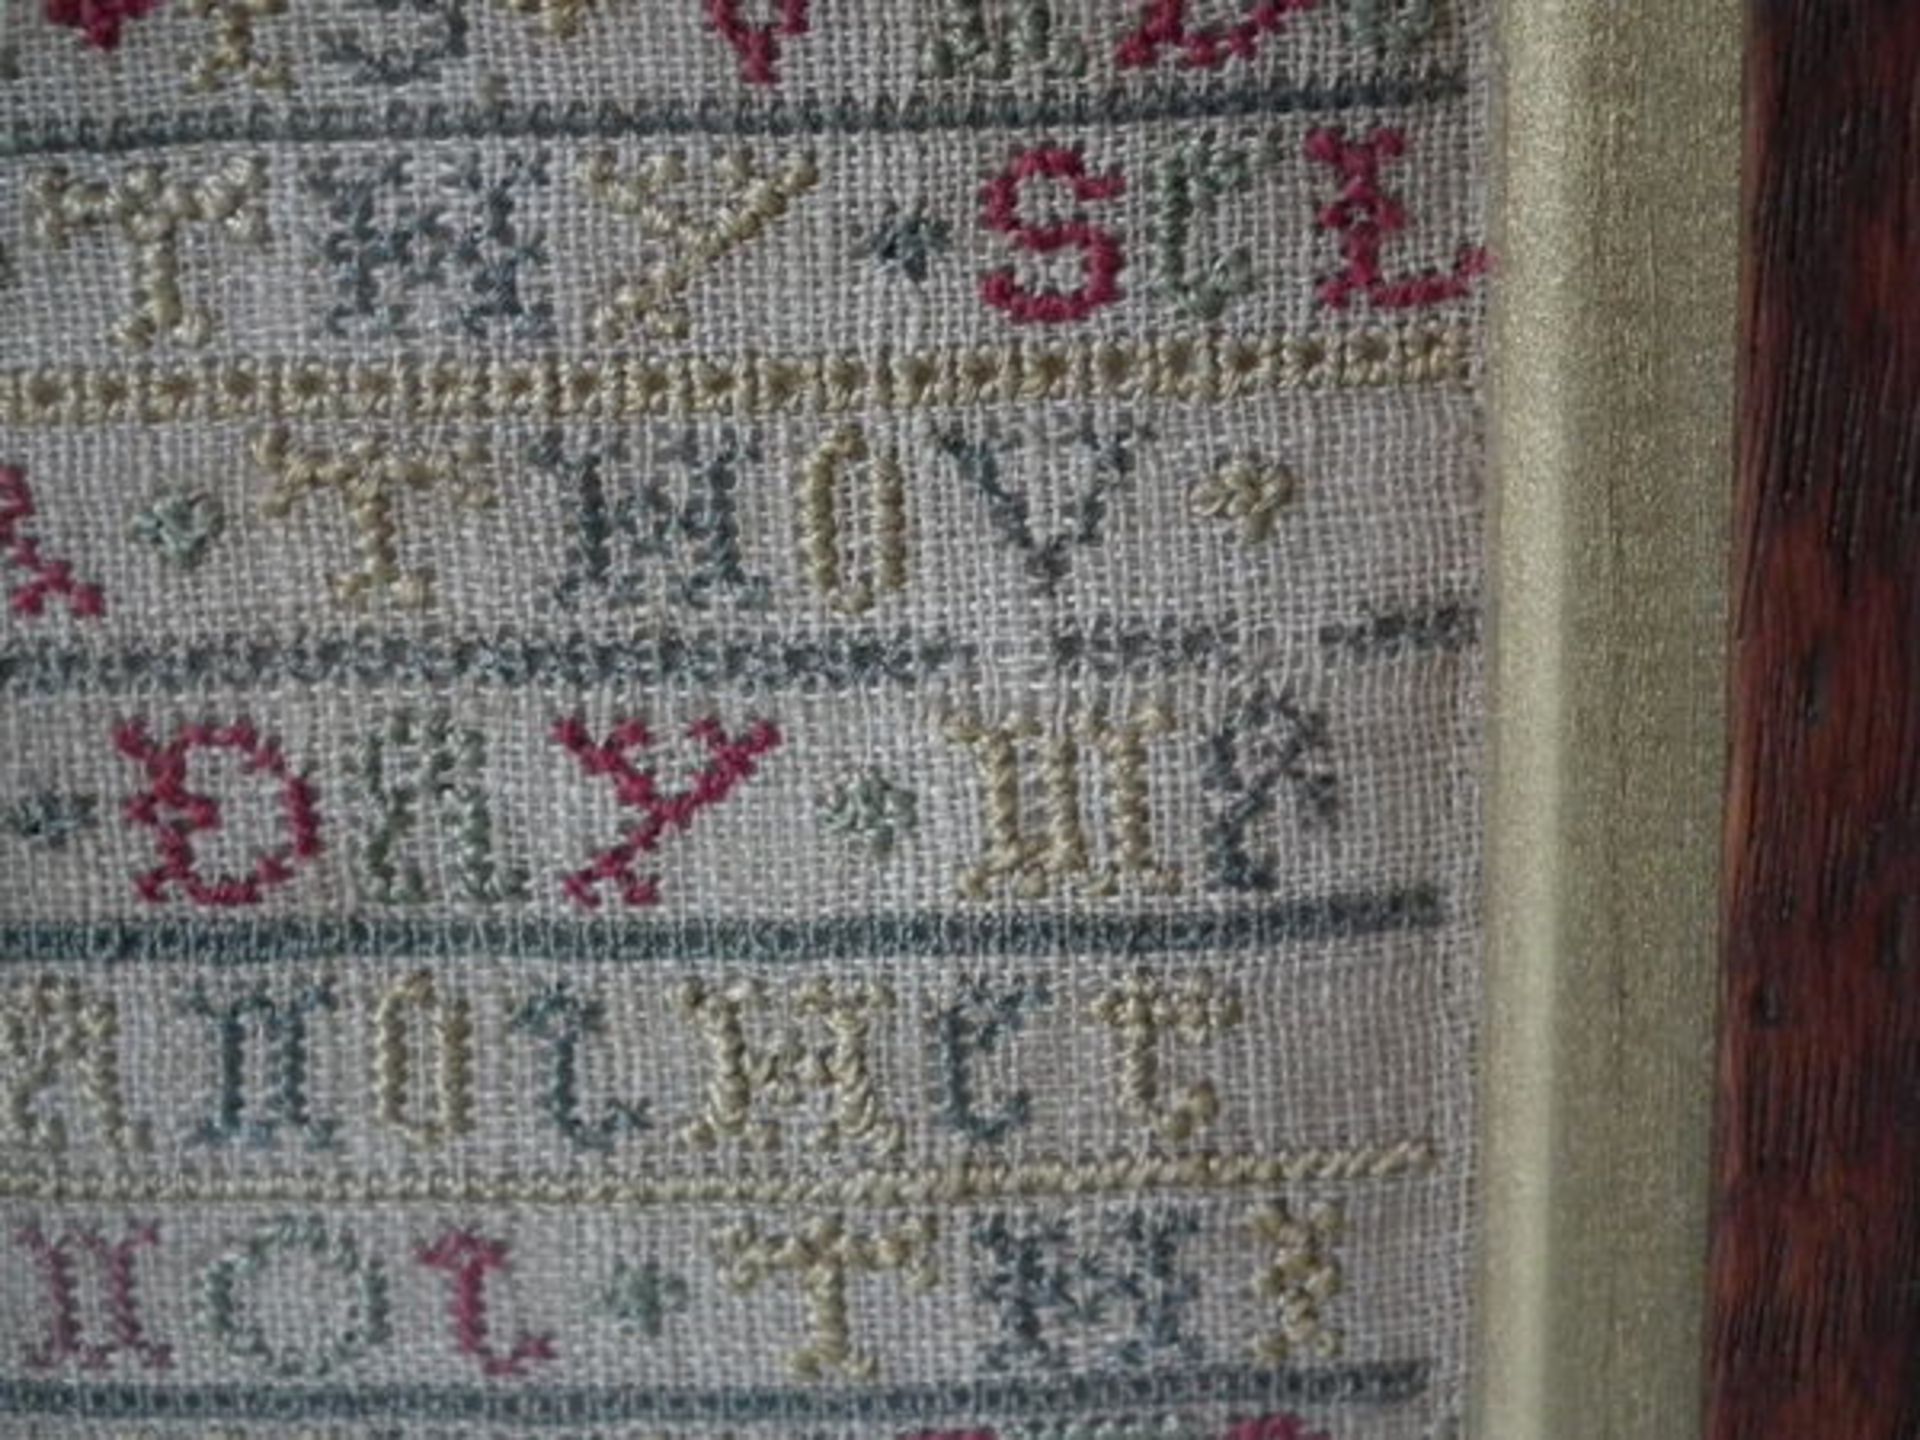 Needlework Band Sampler dated 1724 by Ann Wooding - FREE UK DELIVERY - Image 14 of 20